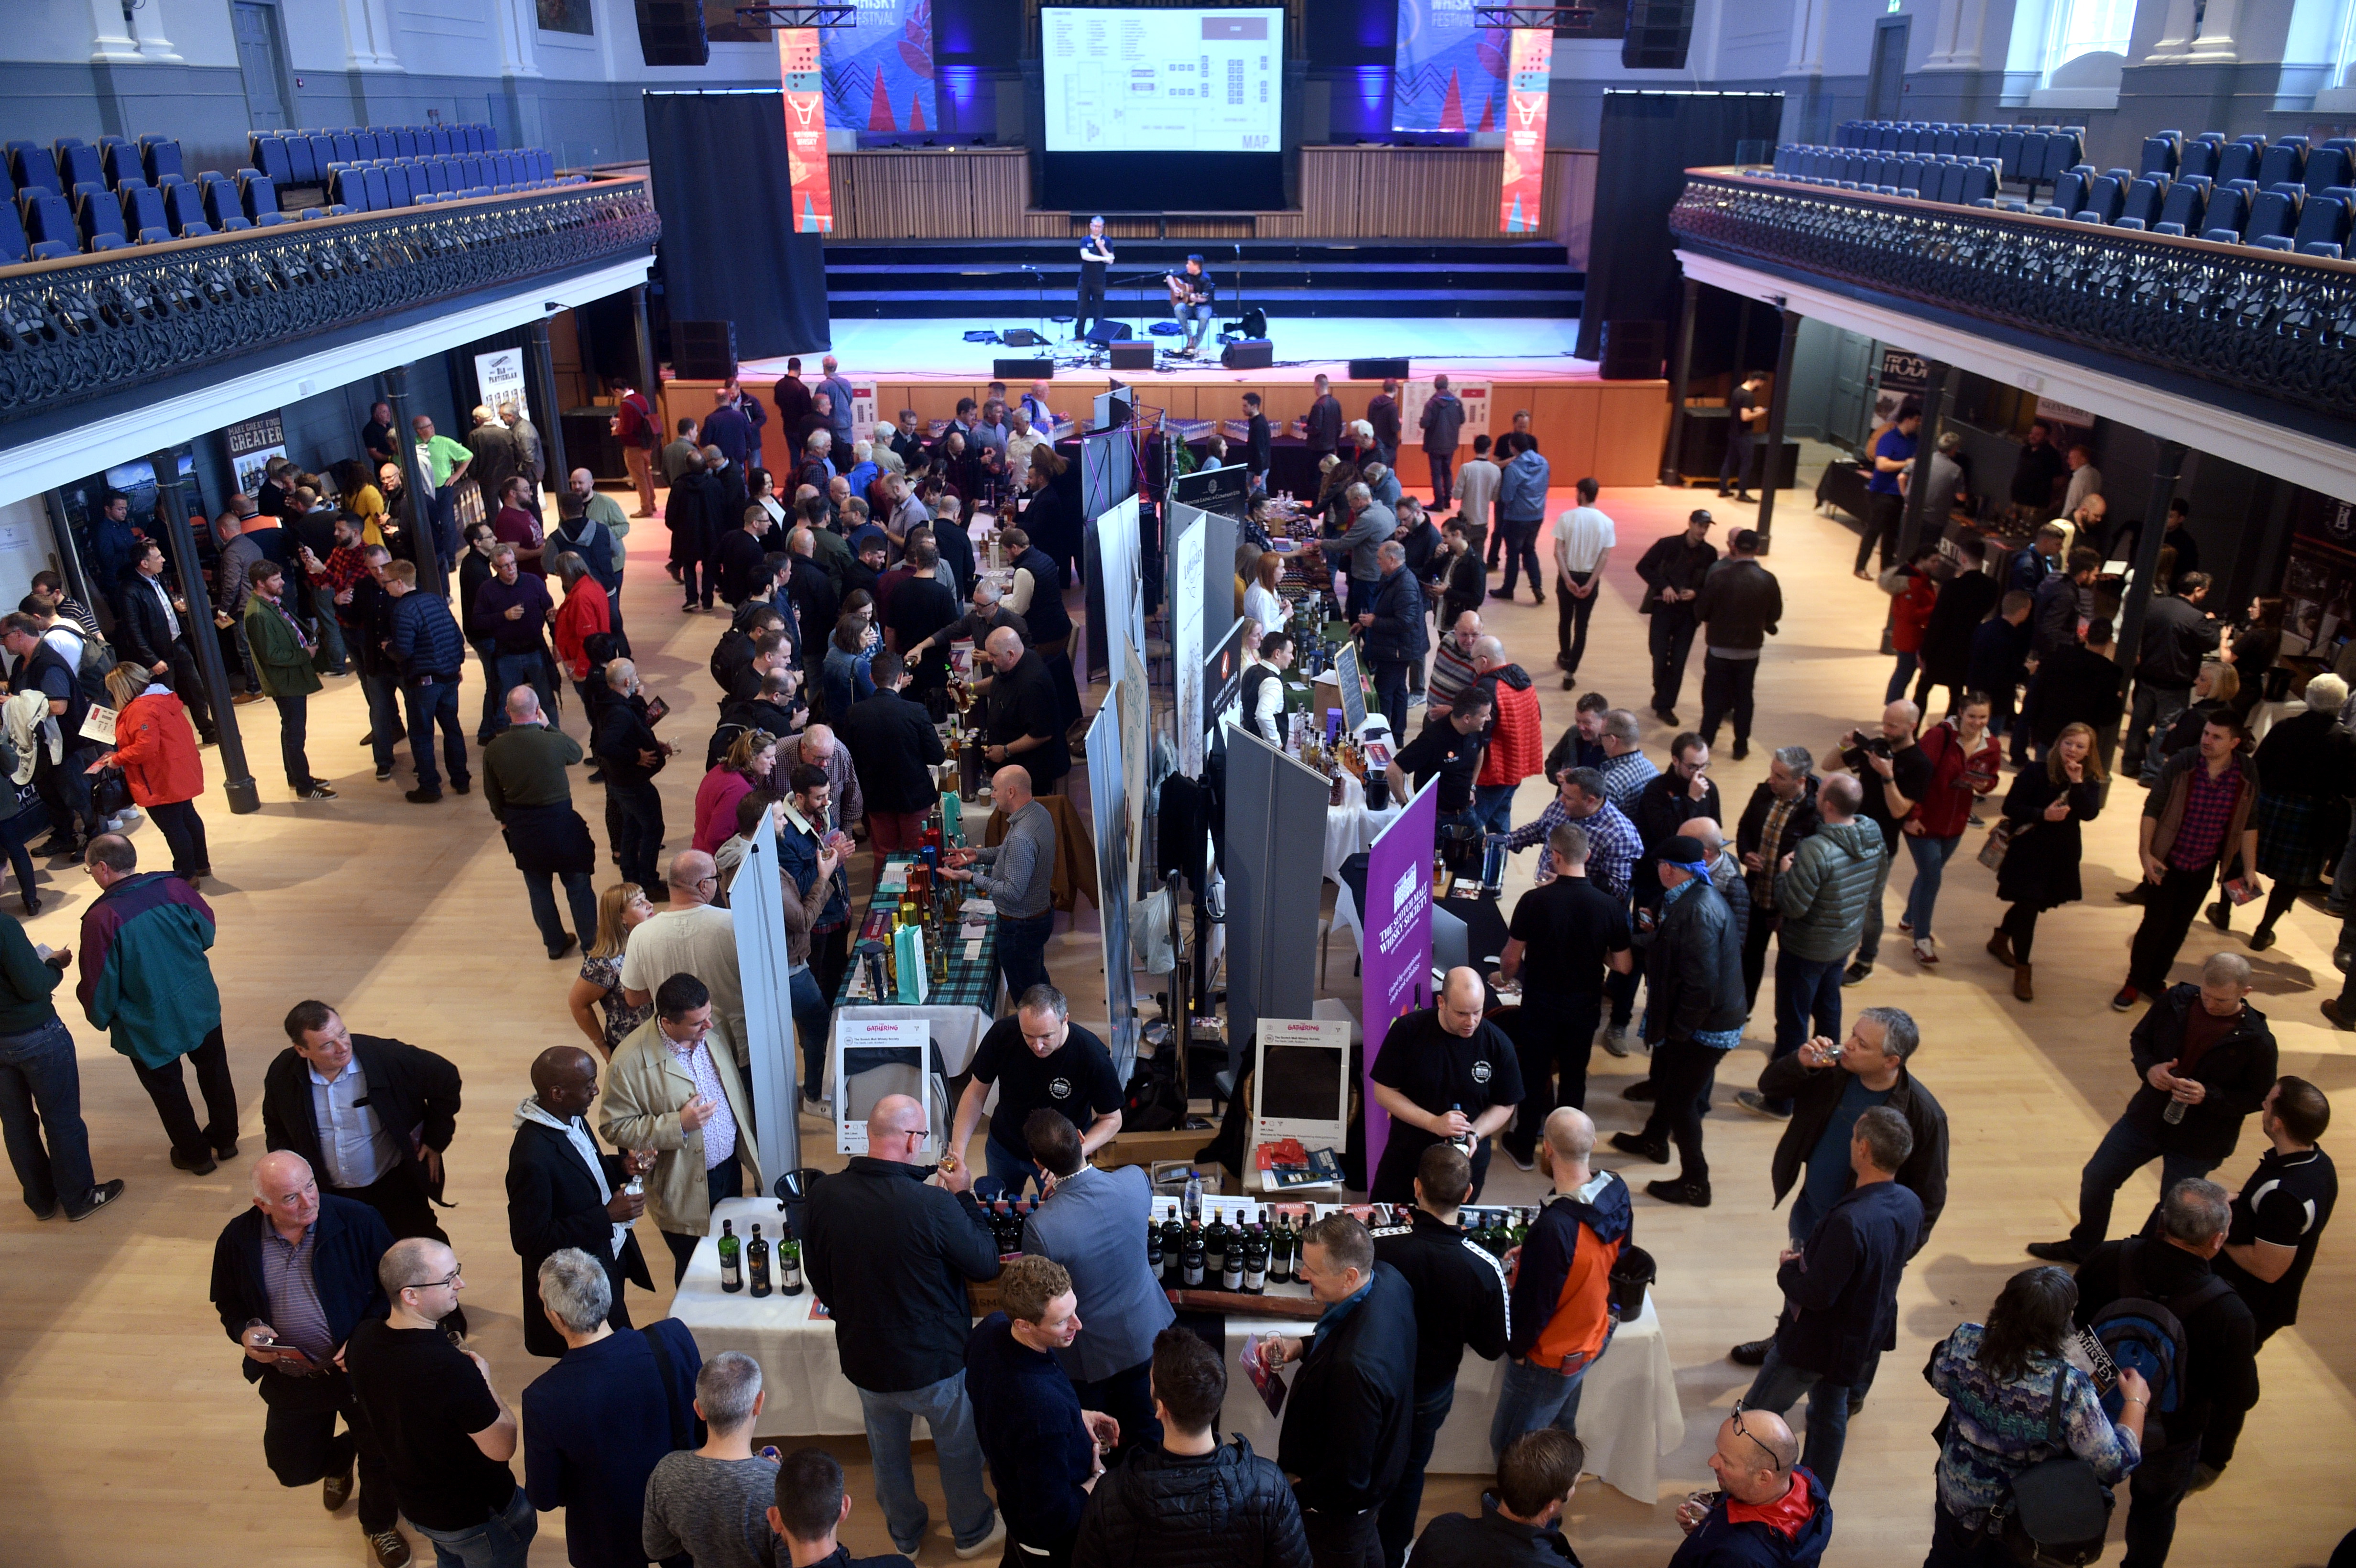 National Whisky Festival staged at the newly refurbished Music Hall in Aberdeen.